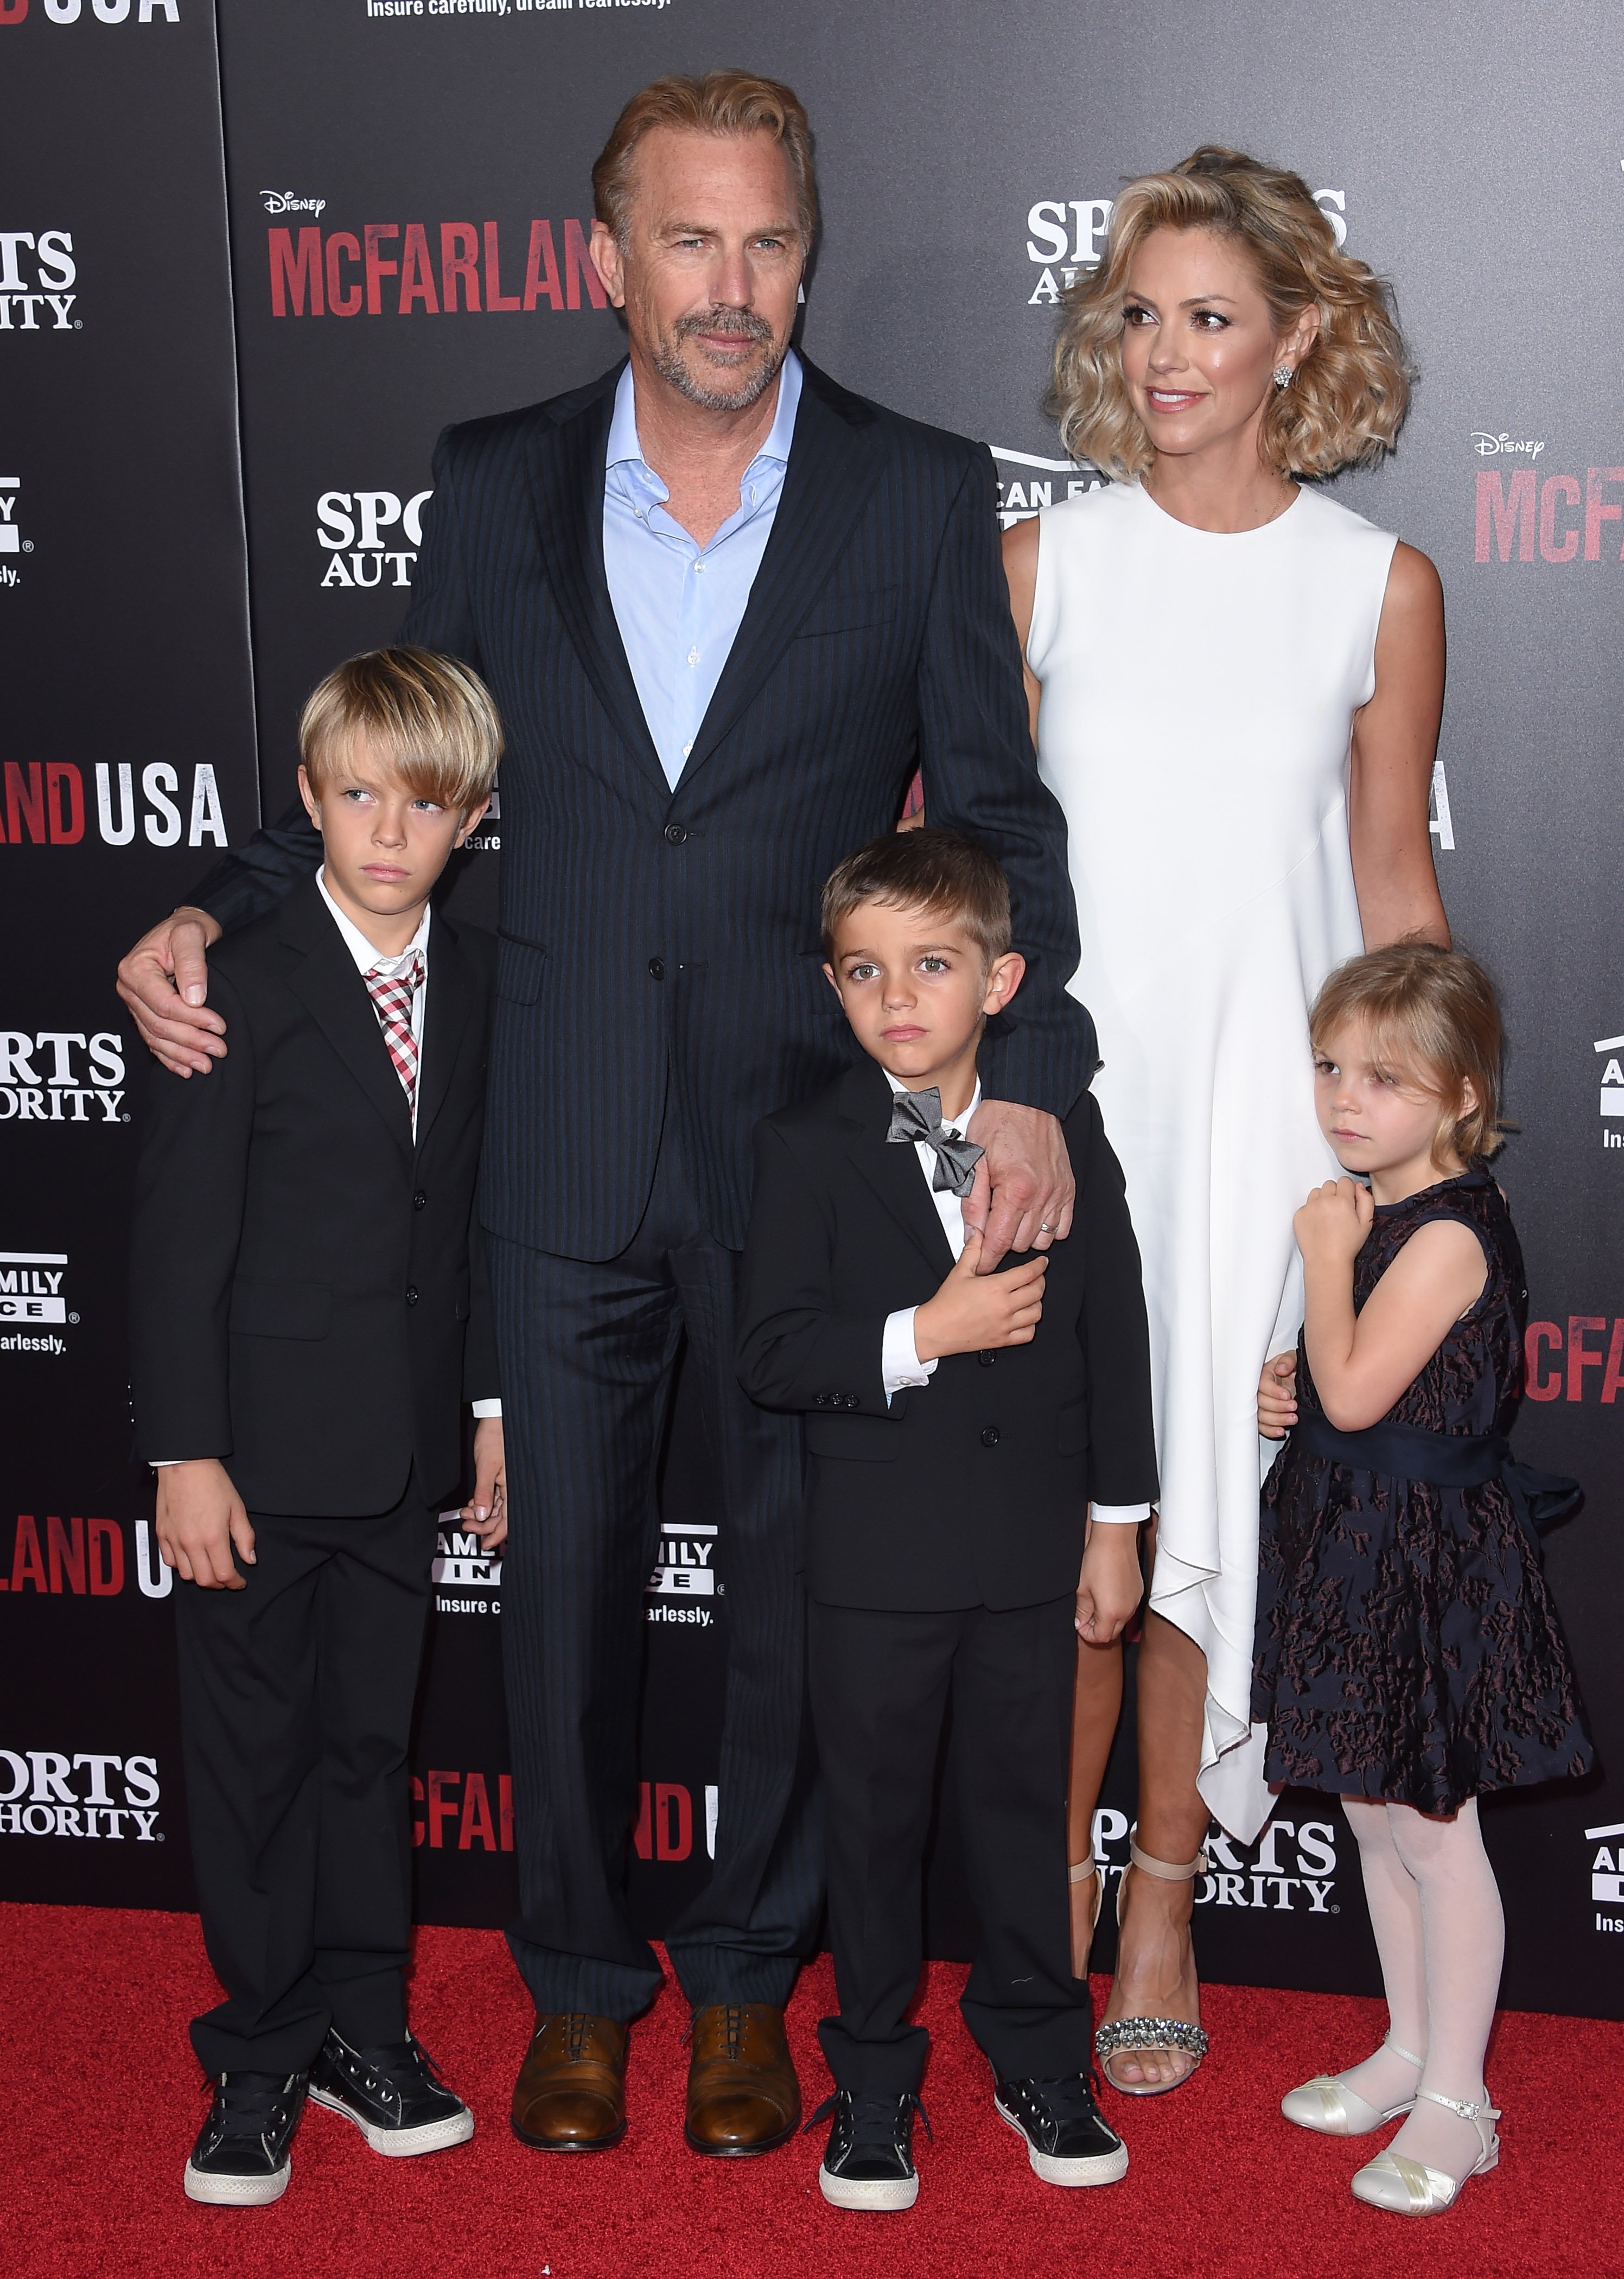 Kevin Costner, Christine Baumgartner and their children Cayden, Hayes and Grace Costner at the world premiere of "McFarland, United States" on February 9, 2015 in Hollywood, California.  |  Source: Getty Images